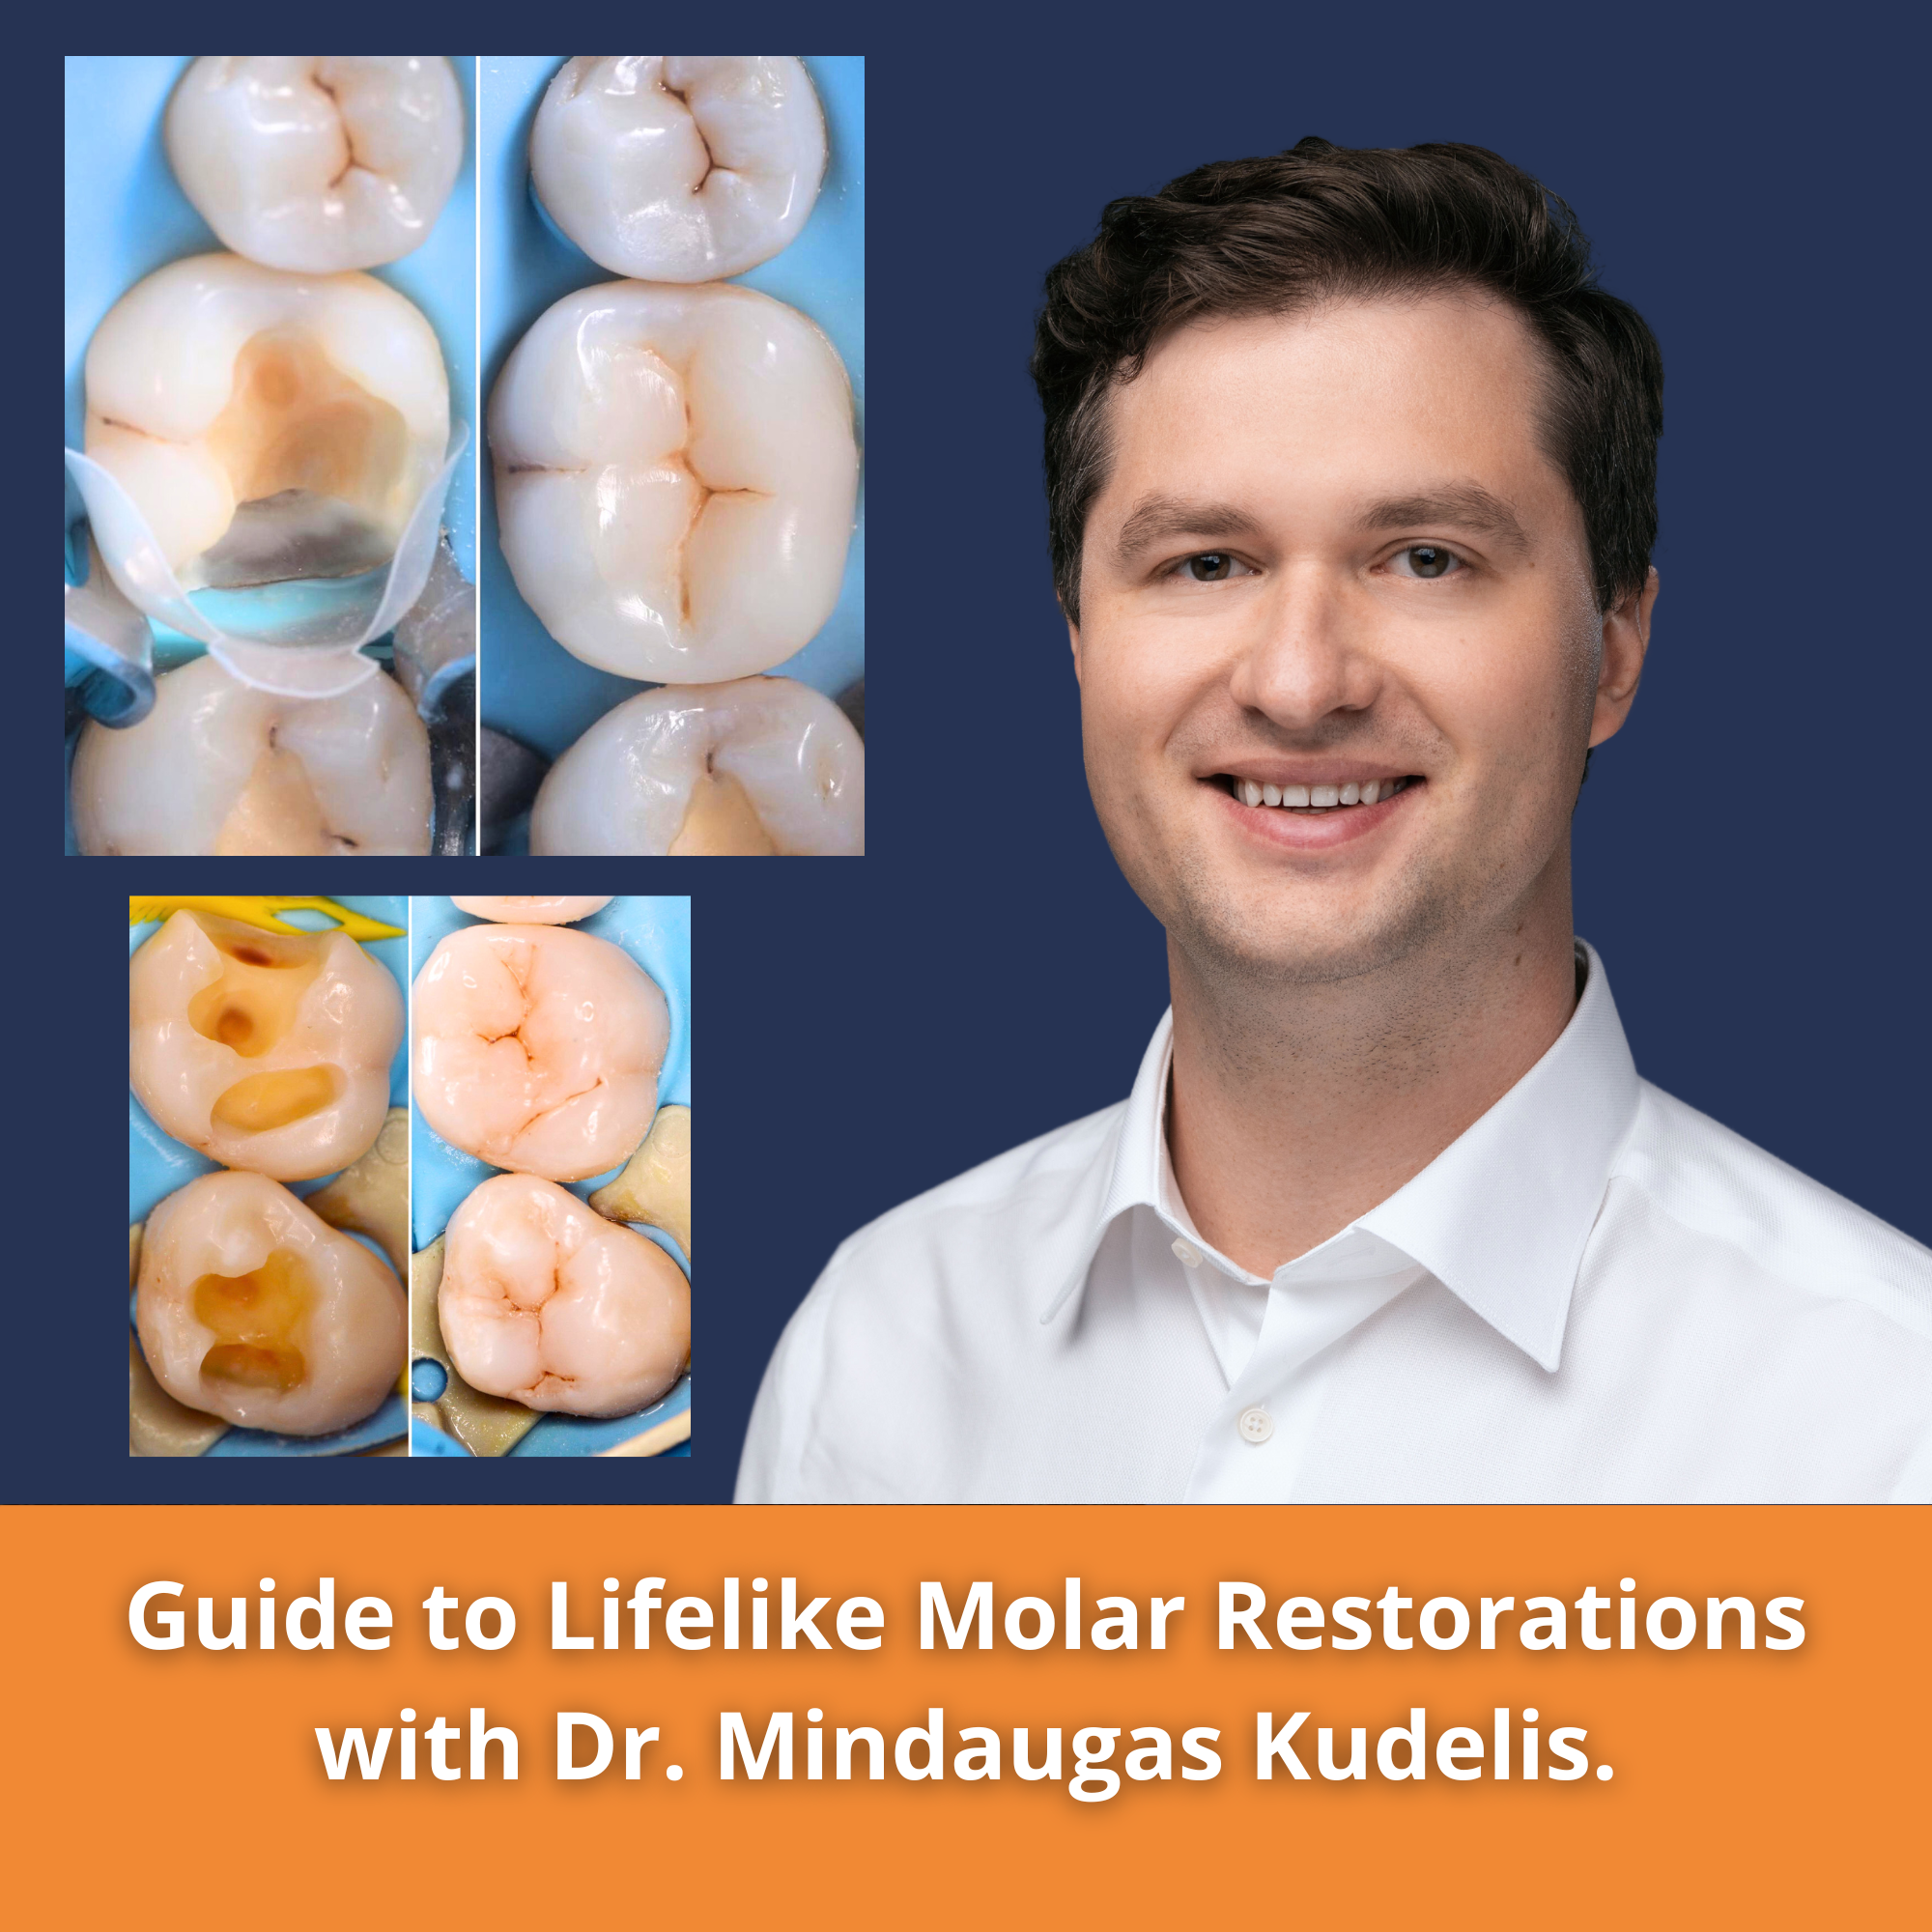 A Guide to Lifelike Molar Restorations with Dr. Mindaugas Kudelis.